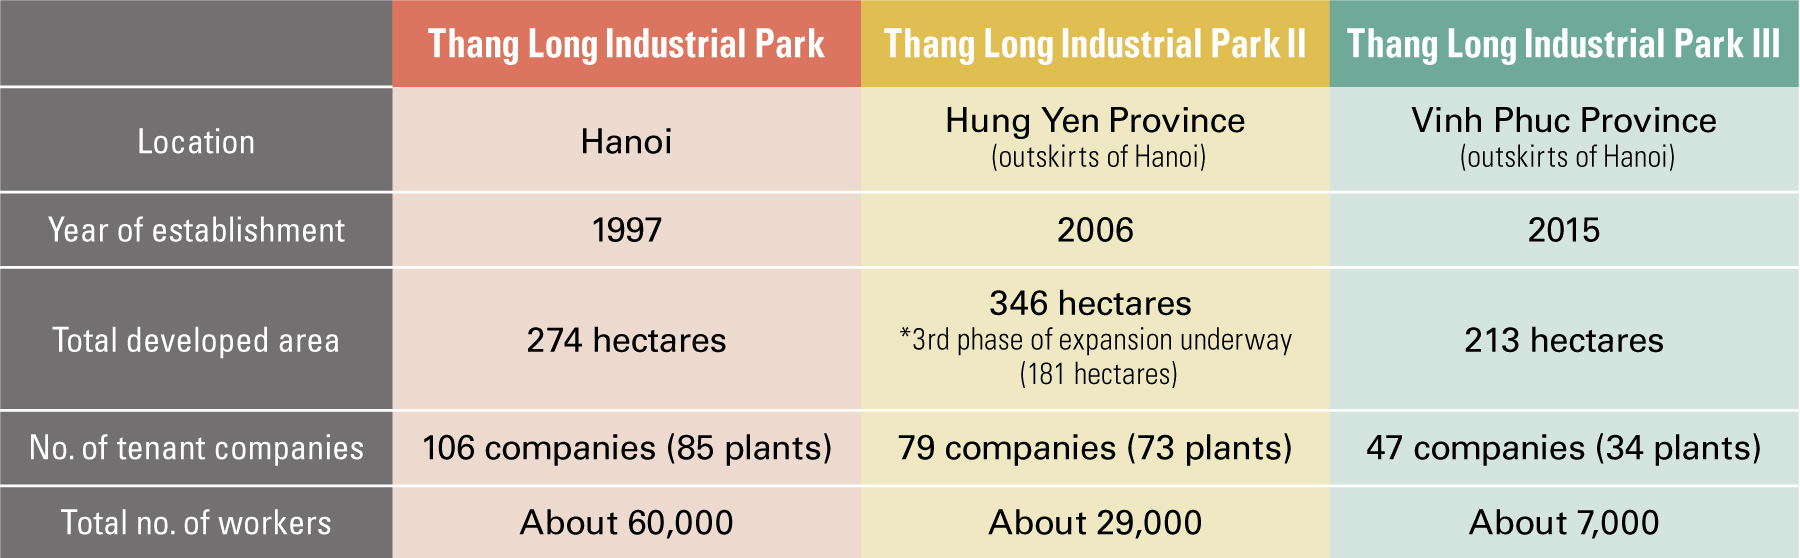 Image of Thang Long Industrial Park Data